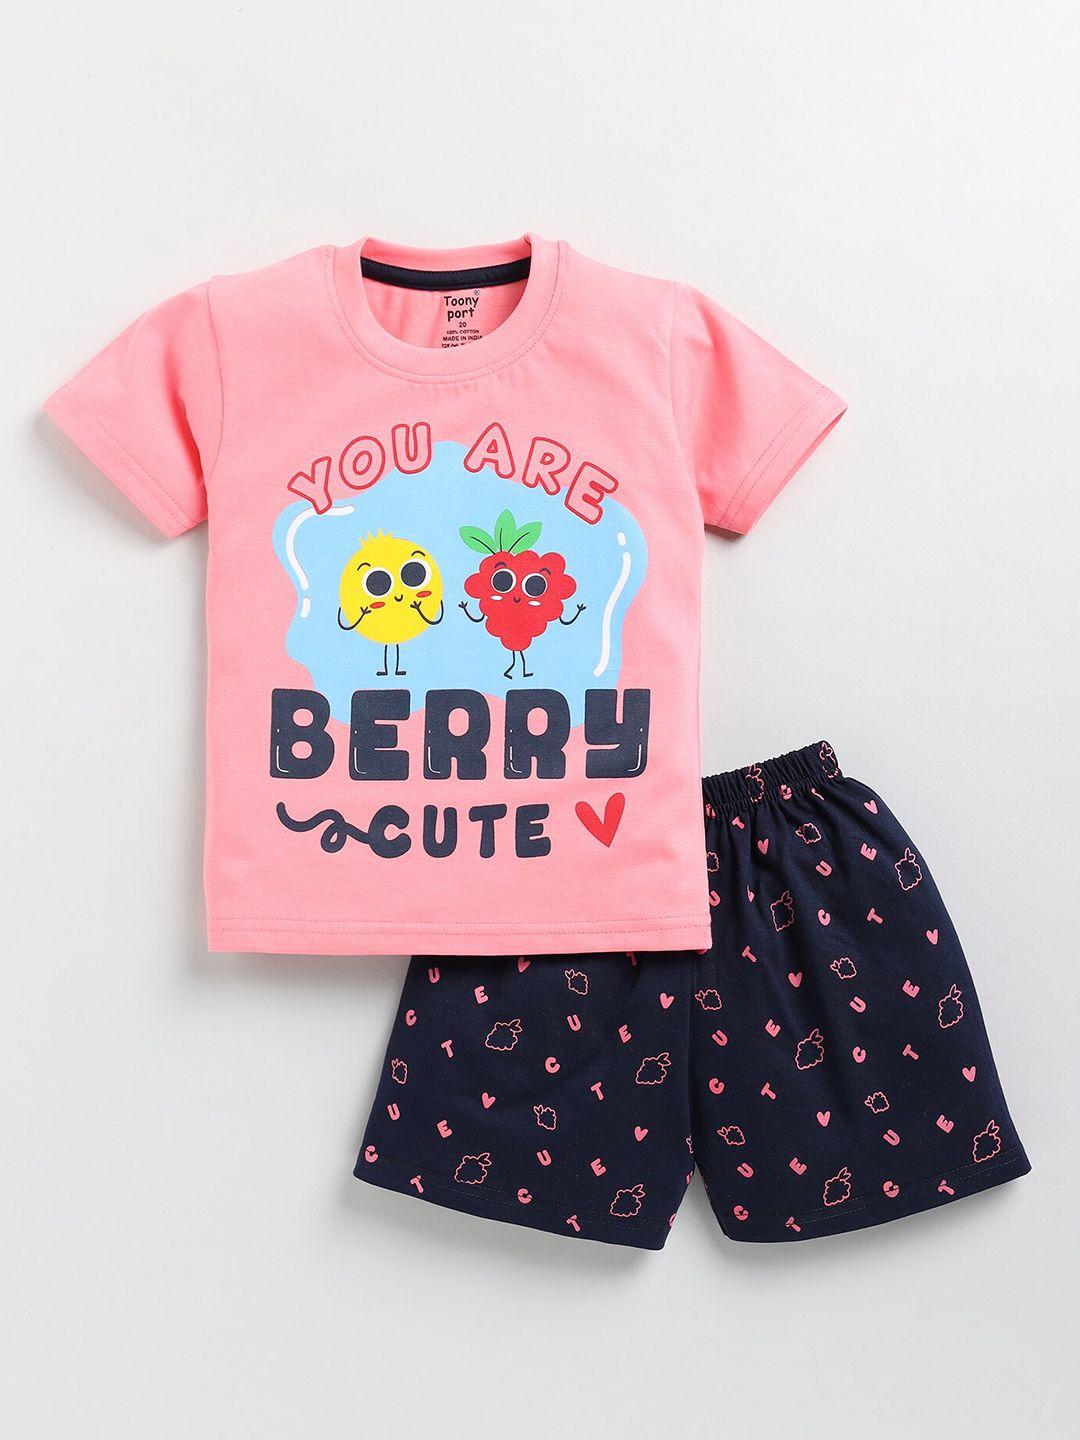 toonyport-boys-printed-pure-cotton-round-neck-t-shirt-with-shorts-clothing-set